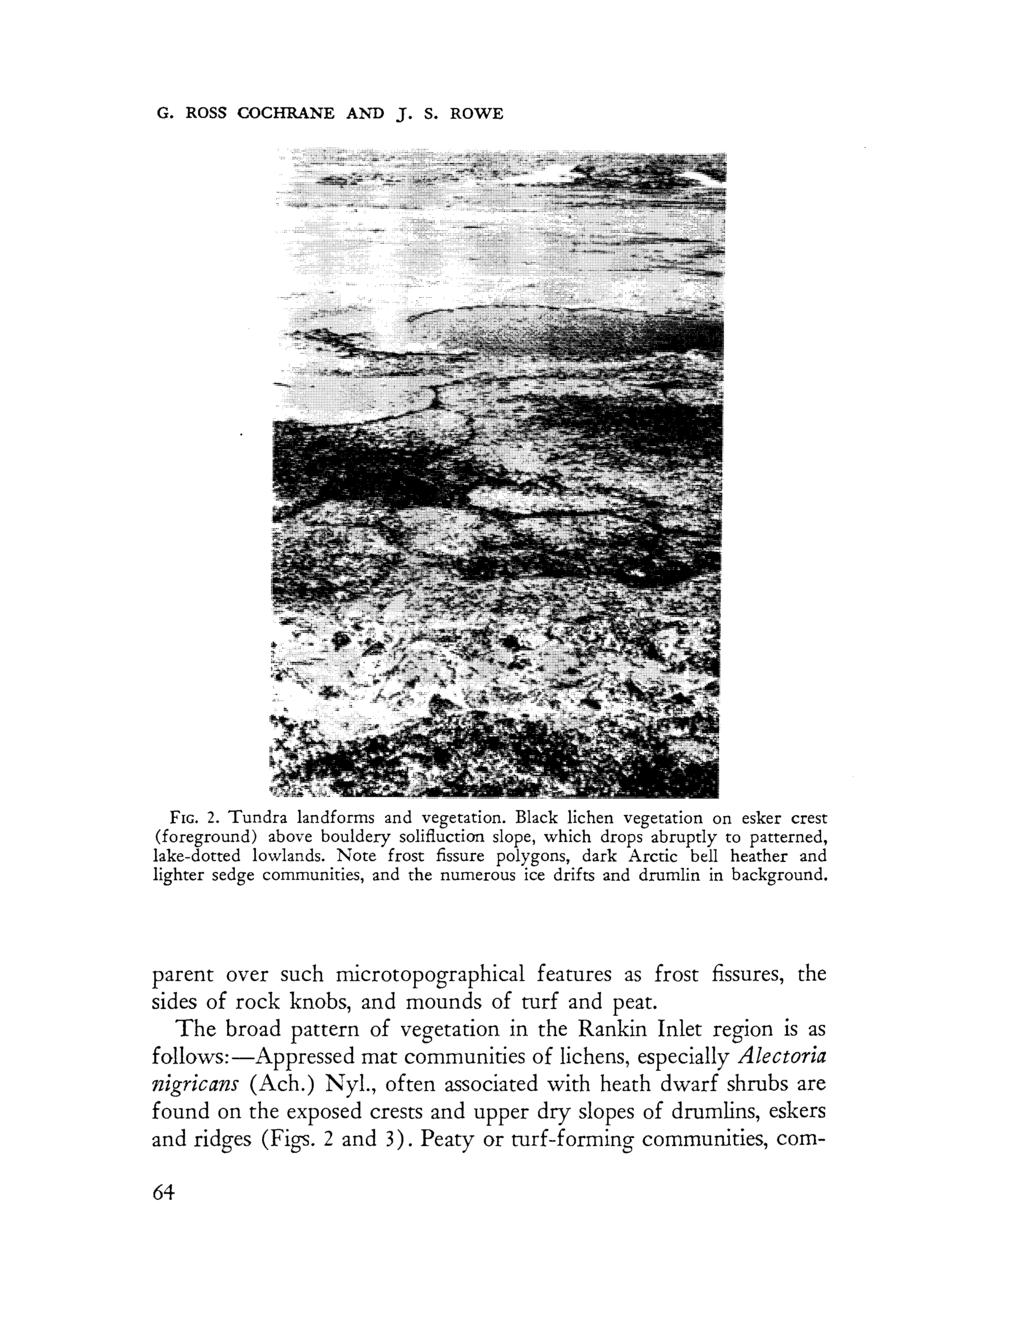 G. ROSS COCHRANE AND J. S. ROWE FIG. 2. Tundra landforms and vegetation.